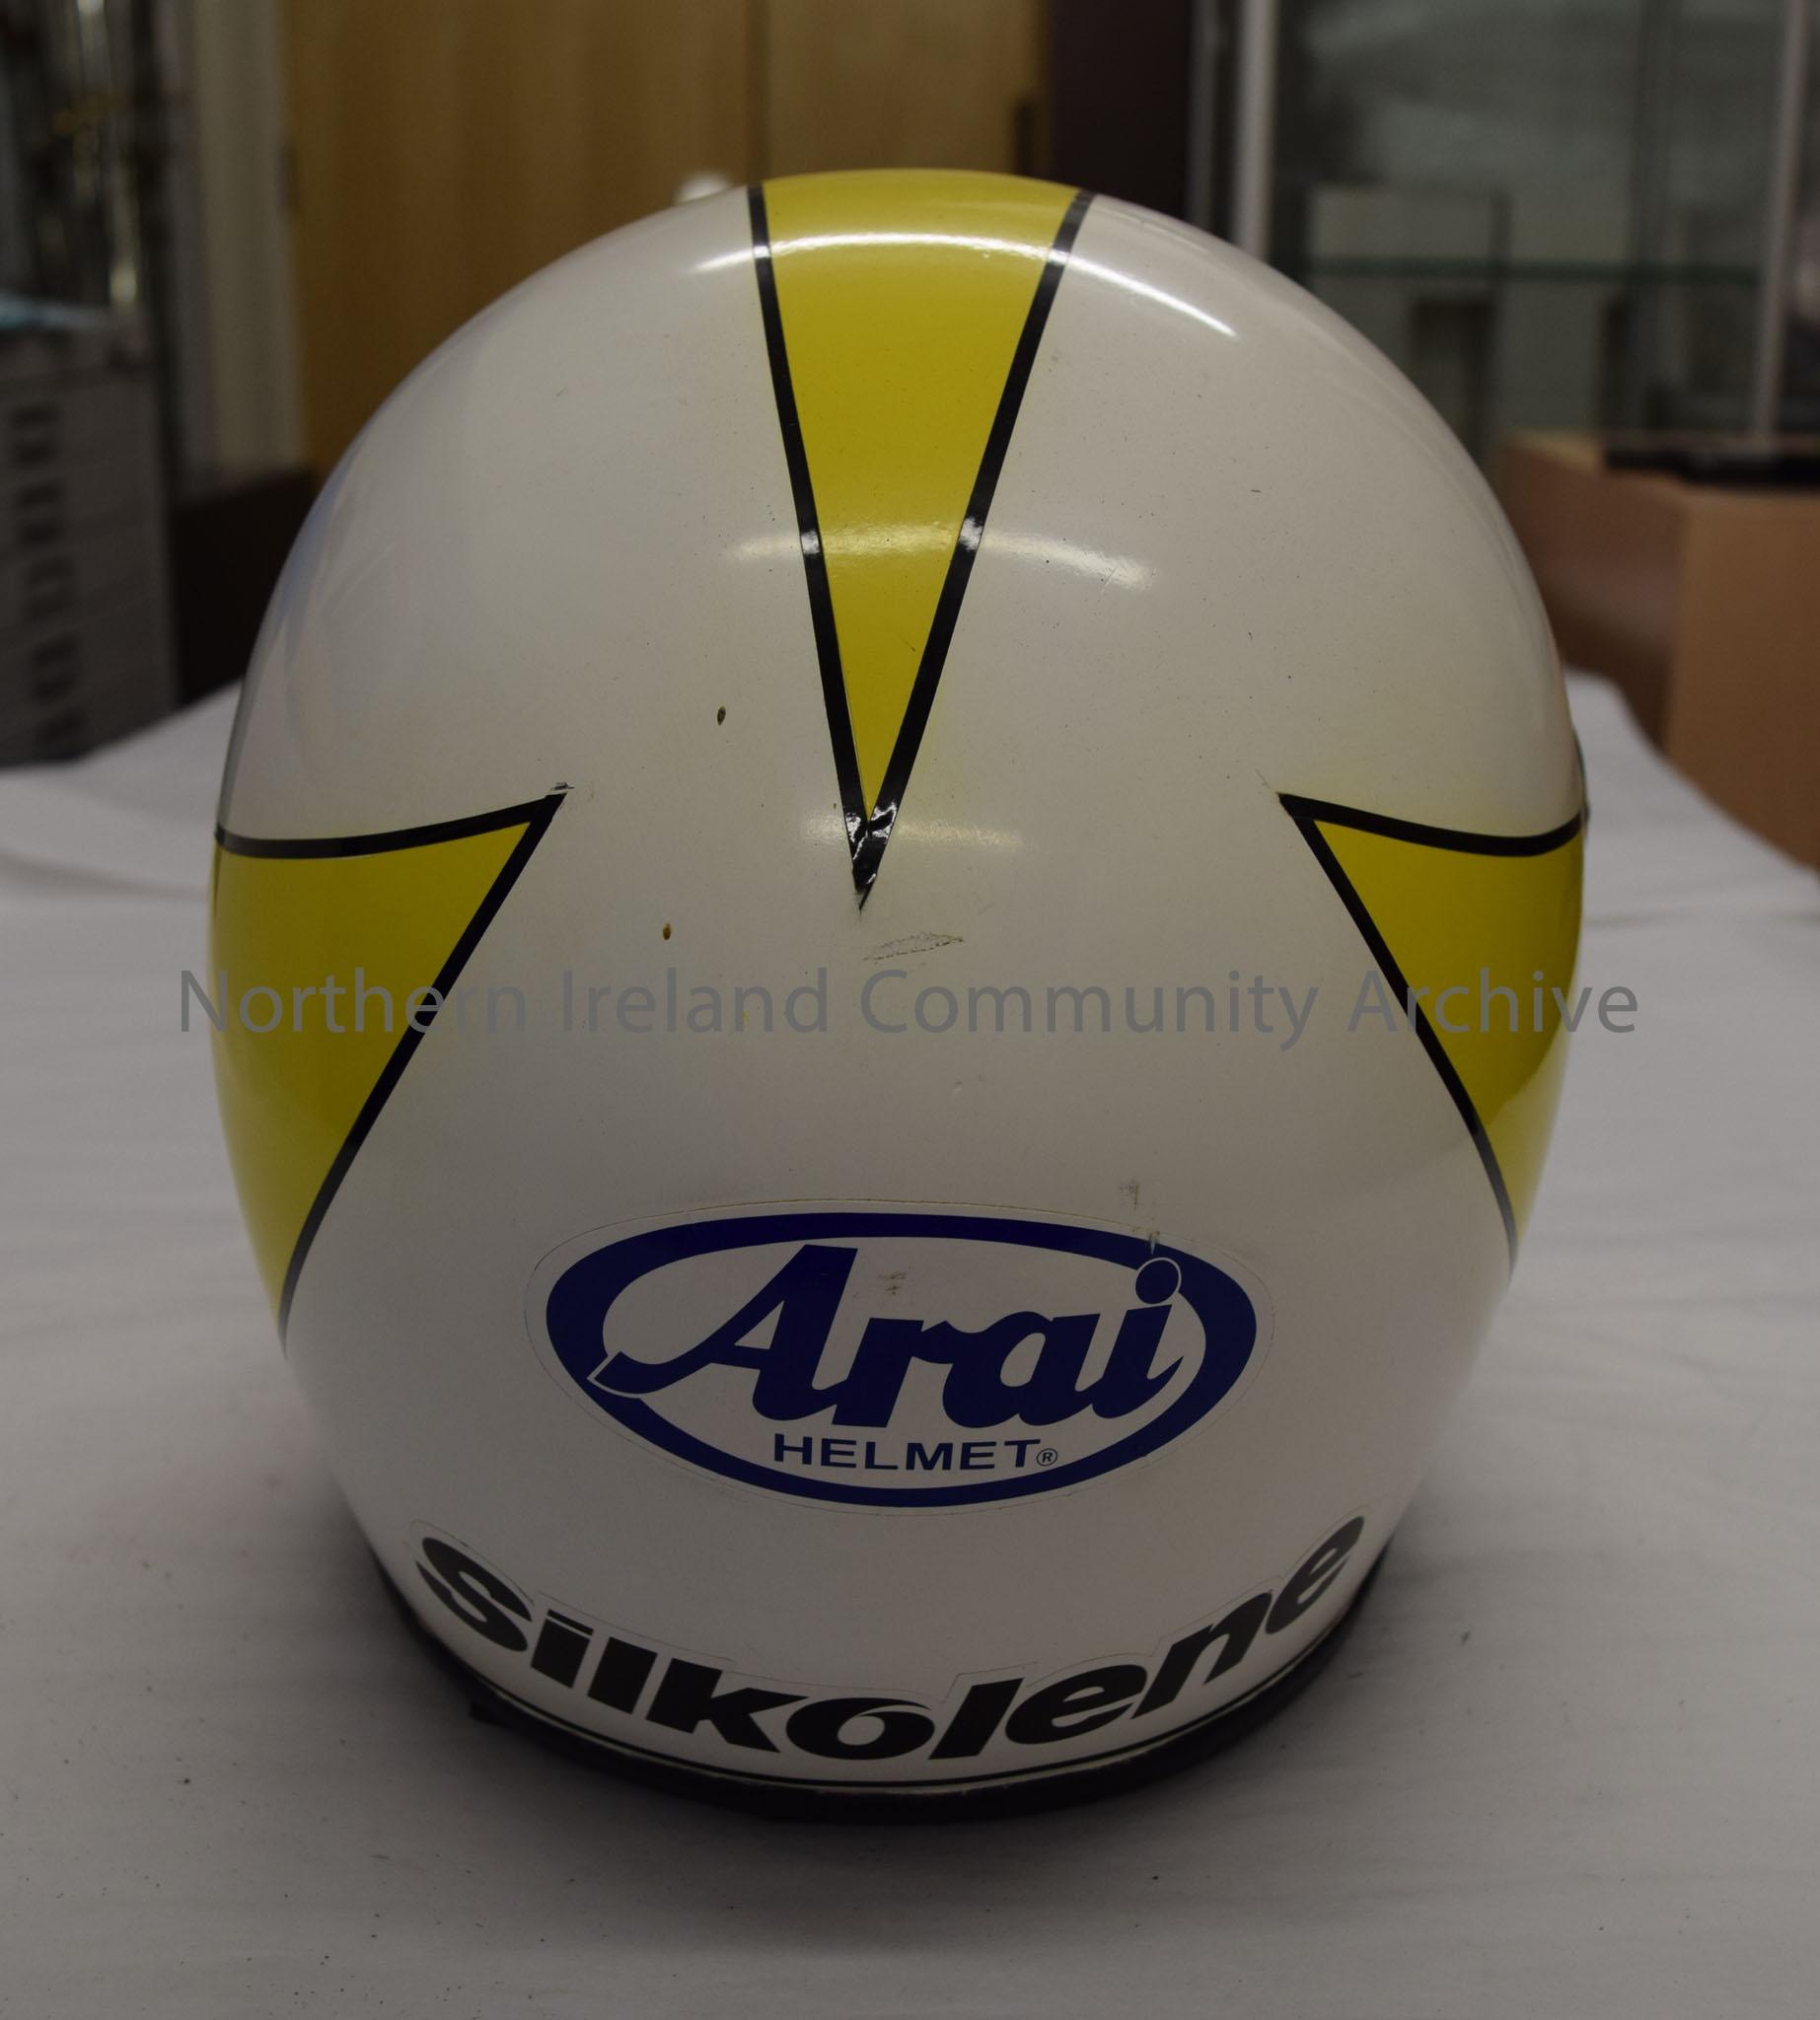 Arai motorcycle helmet belonging to Johnny Dunn. White with yellow front that reaches back to three points. Has a black border. – 2016.79 (4)